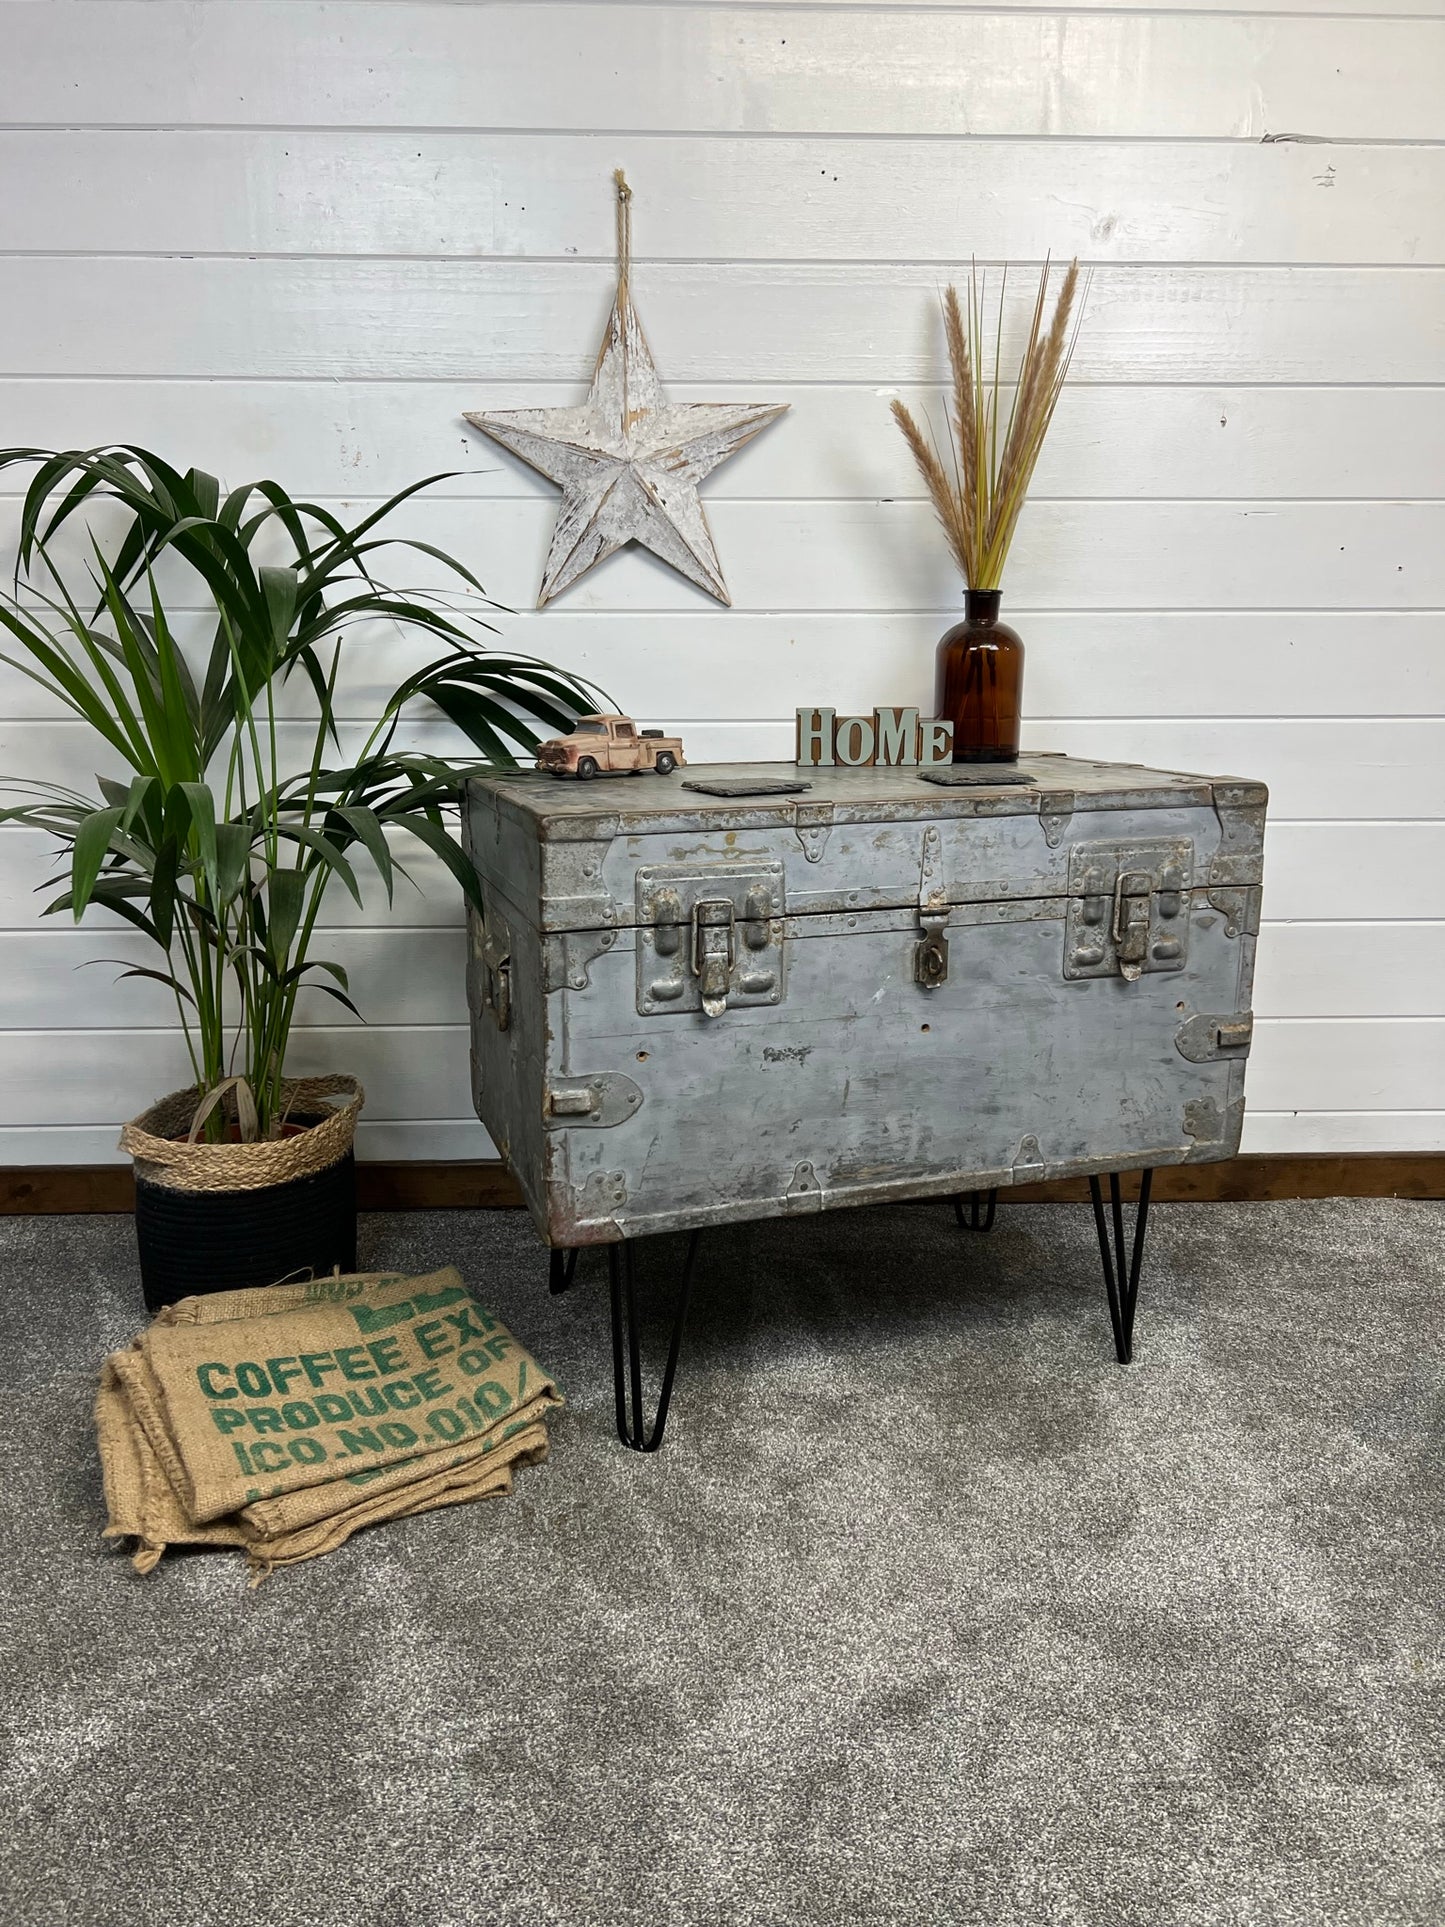 Vintage Industrial Chest Trunk Table Reclaimed Large Coffee Side Table Blanket Box Rustic Steampunk Storage